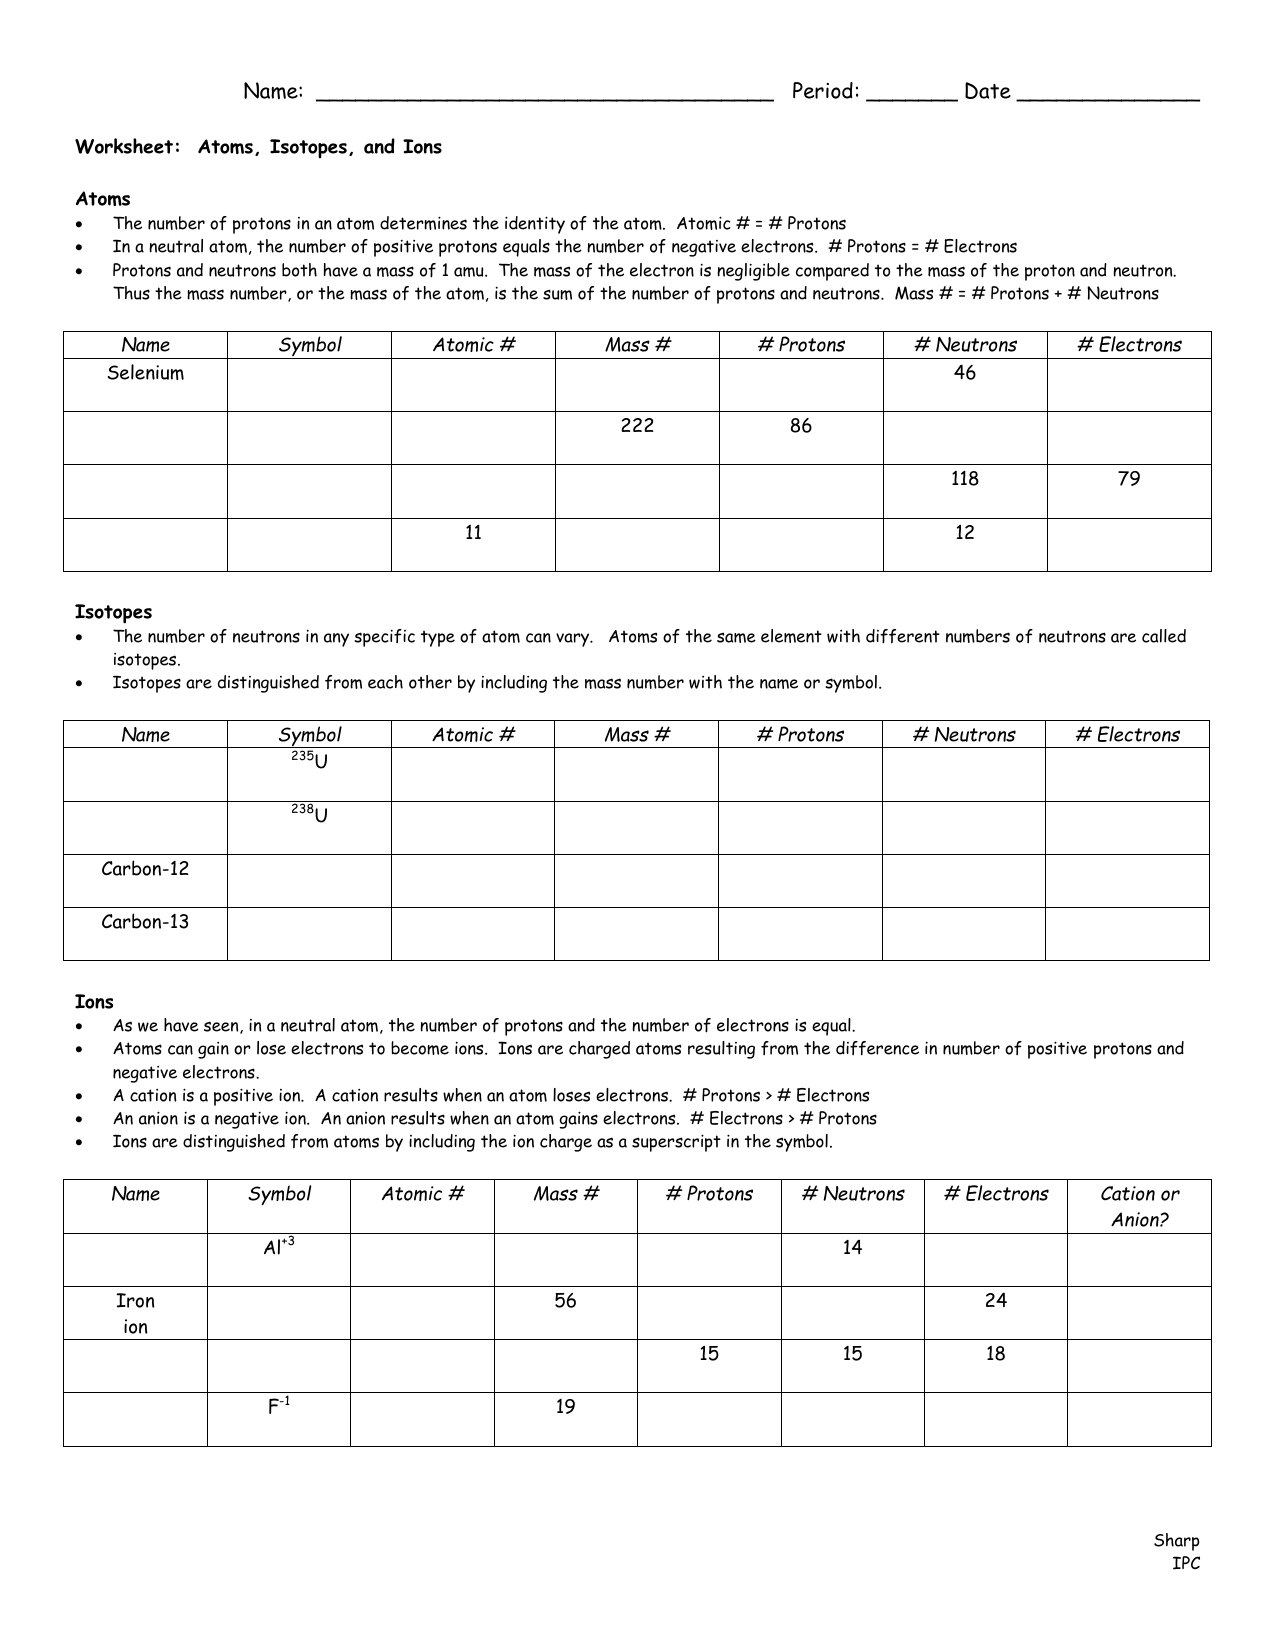 Atoms, Isotopes, & Ions Worksheet Intended For Atoms And Isotopes Worksheet Answers